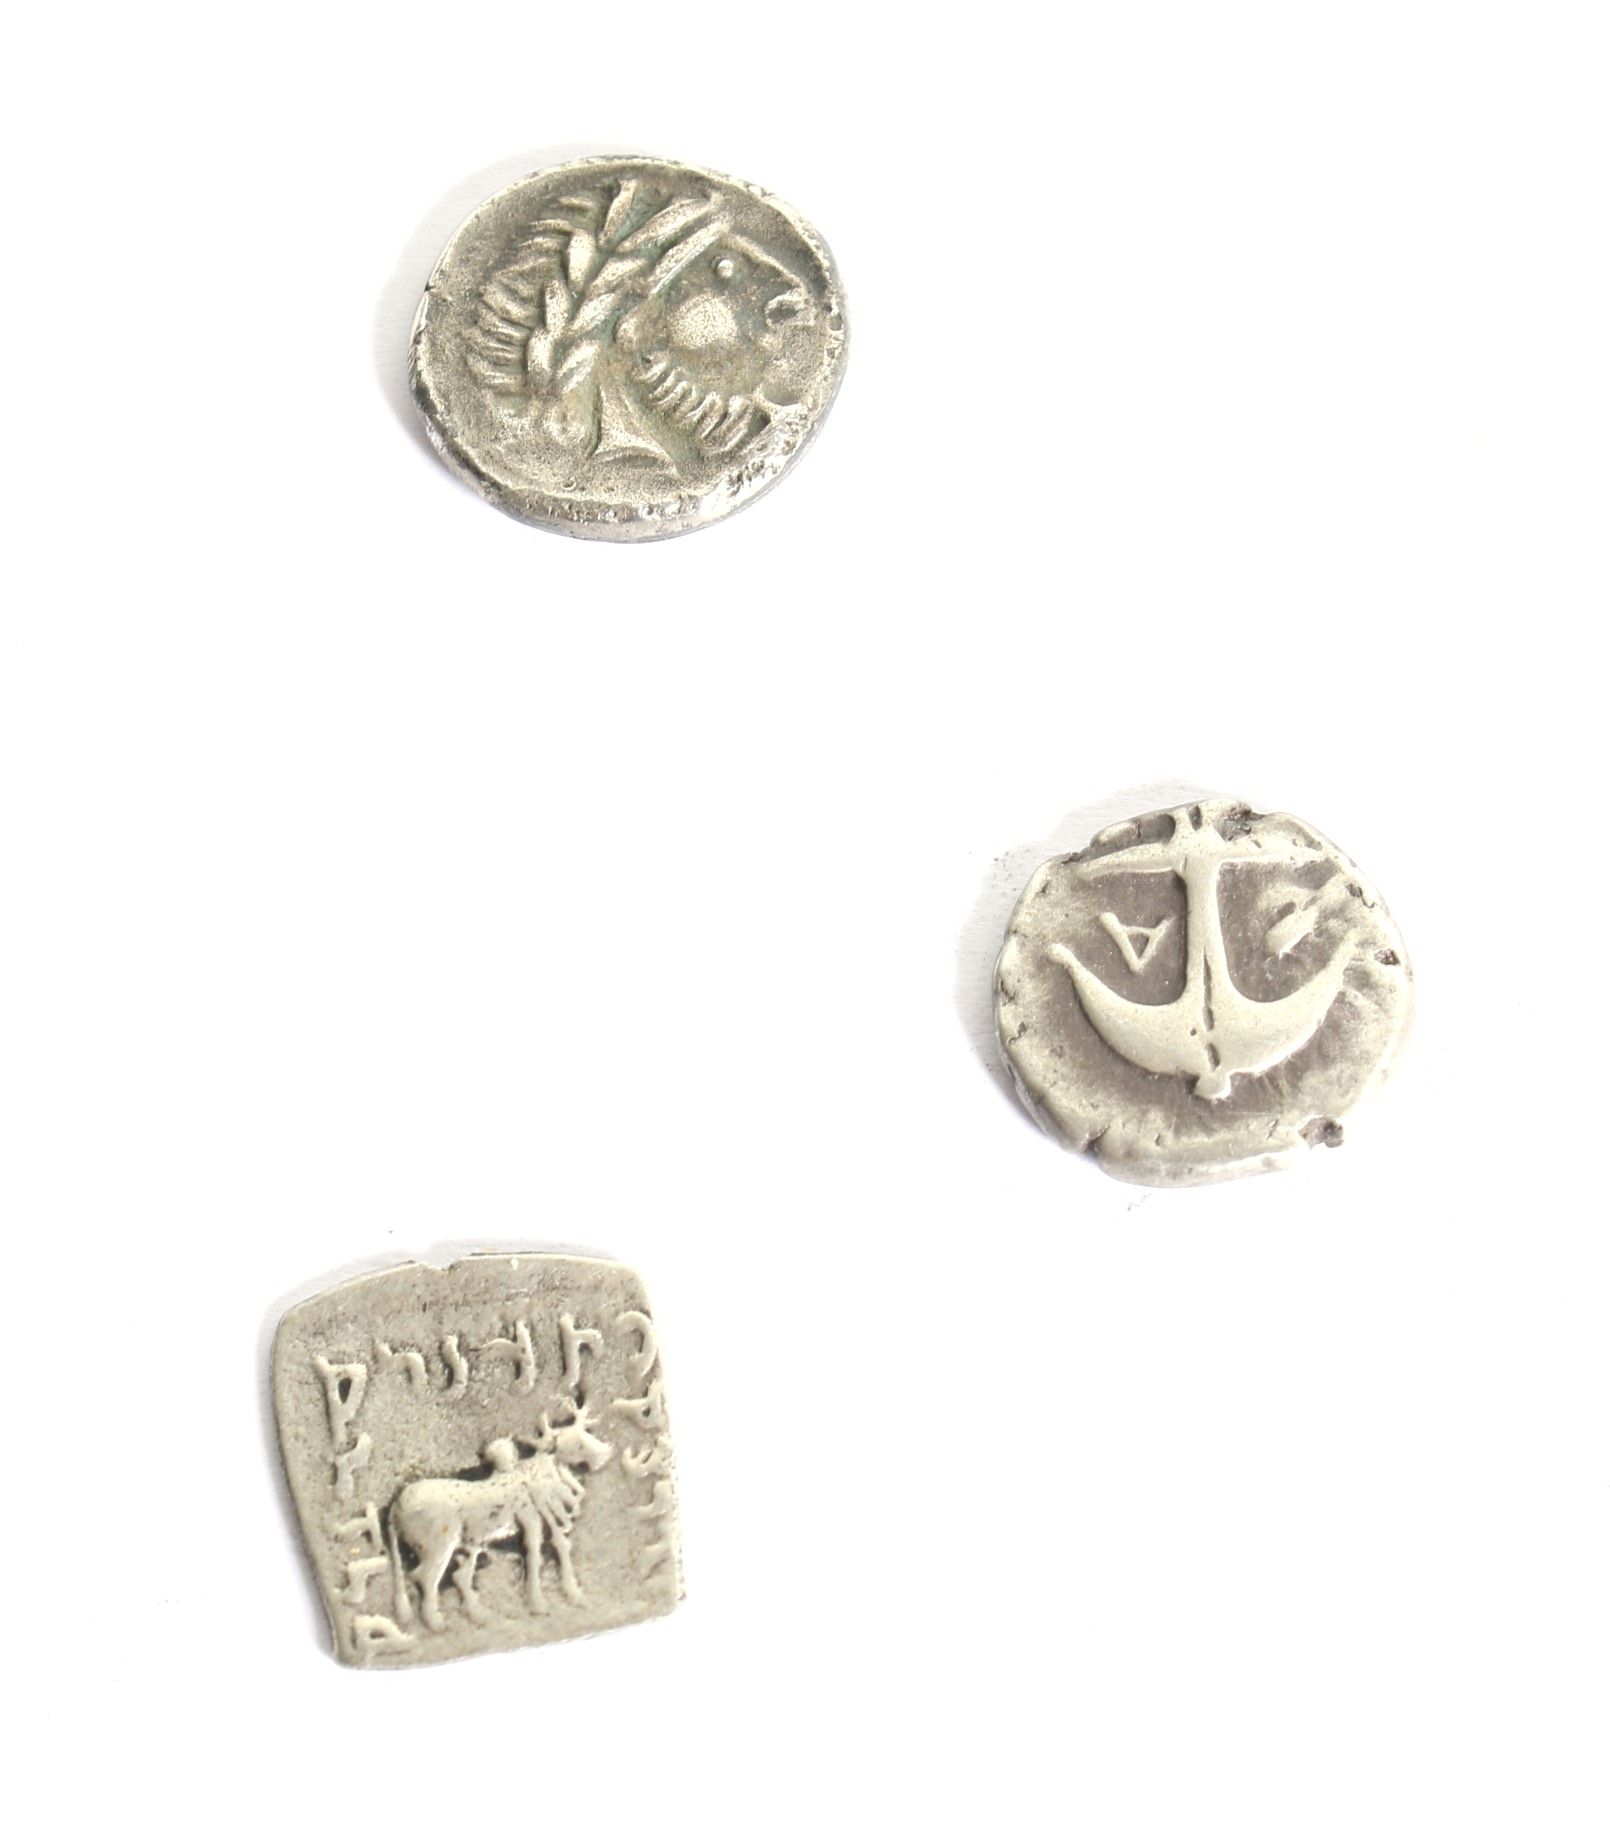 A group ot three Ancient Greek coins. - Image 2 of 2